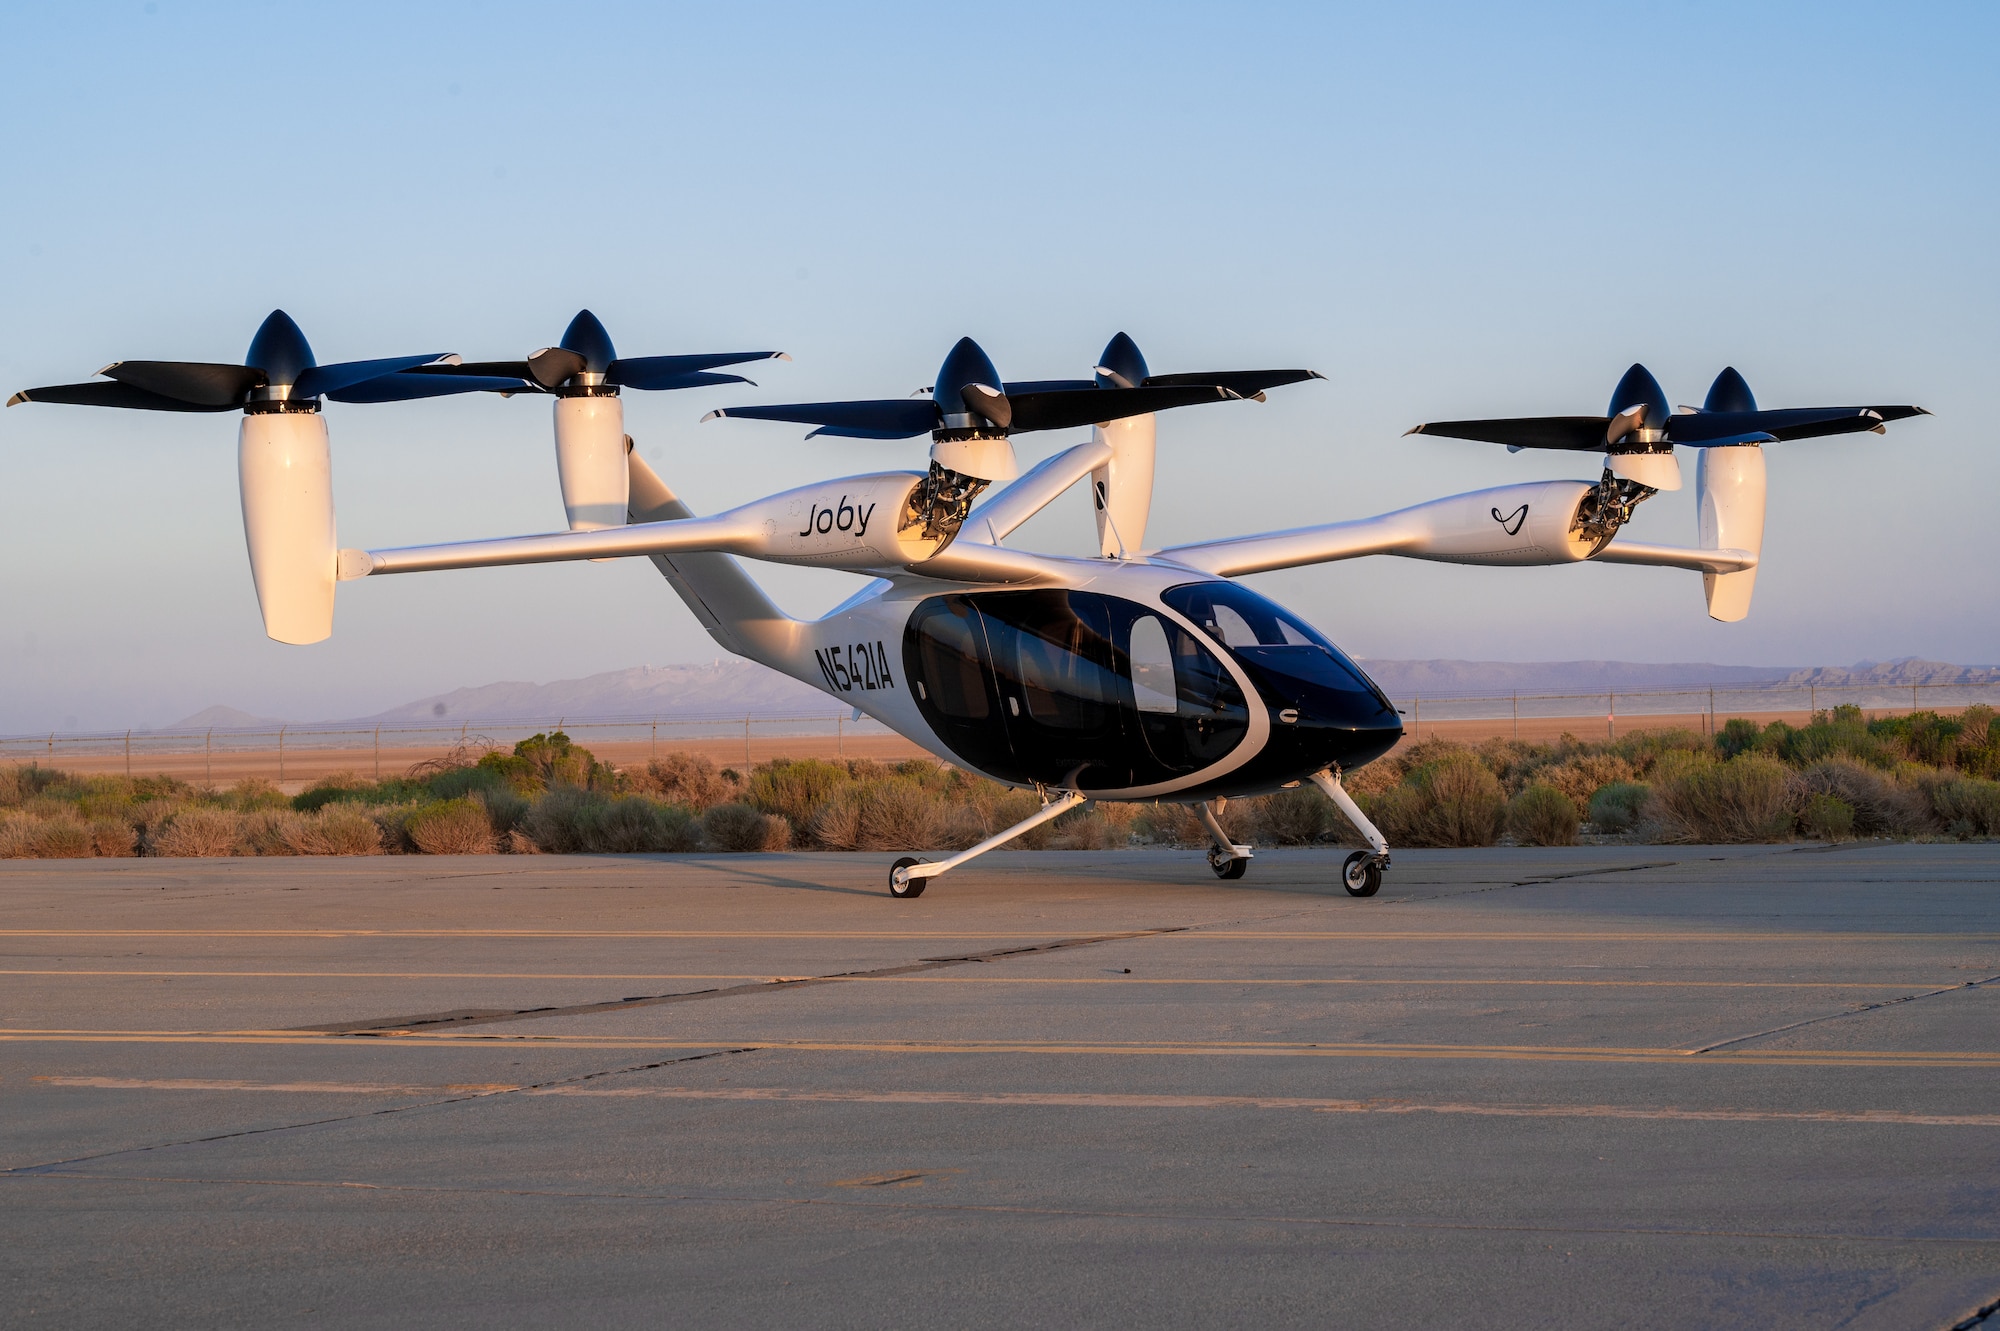 A Joby Aviation, Inc. experimental electronic vertical take-off and landing aircraft is parked at taxi way following a ground test at Edwards Air Force Base, California, Sept. 20. (Air Force photo by Harlan Huntington)